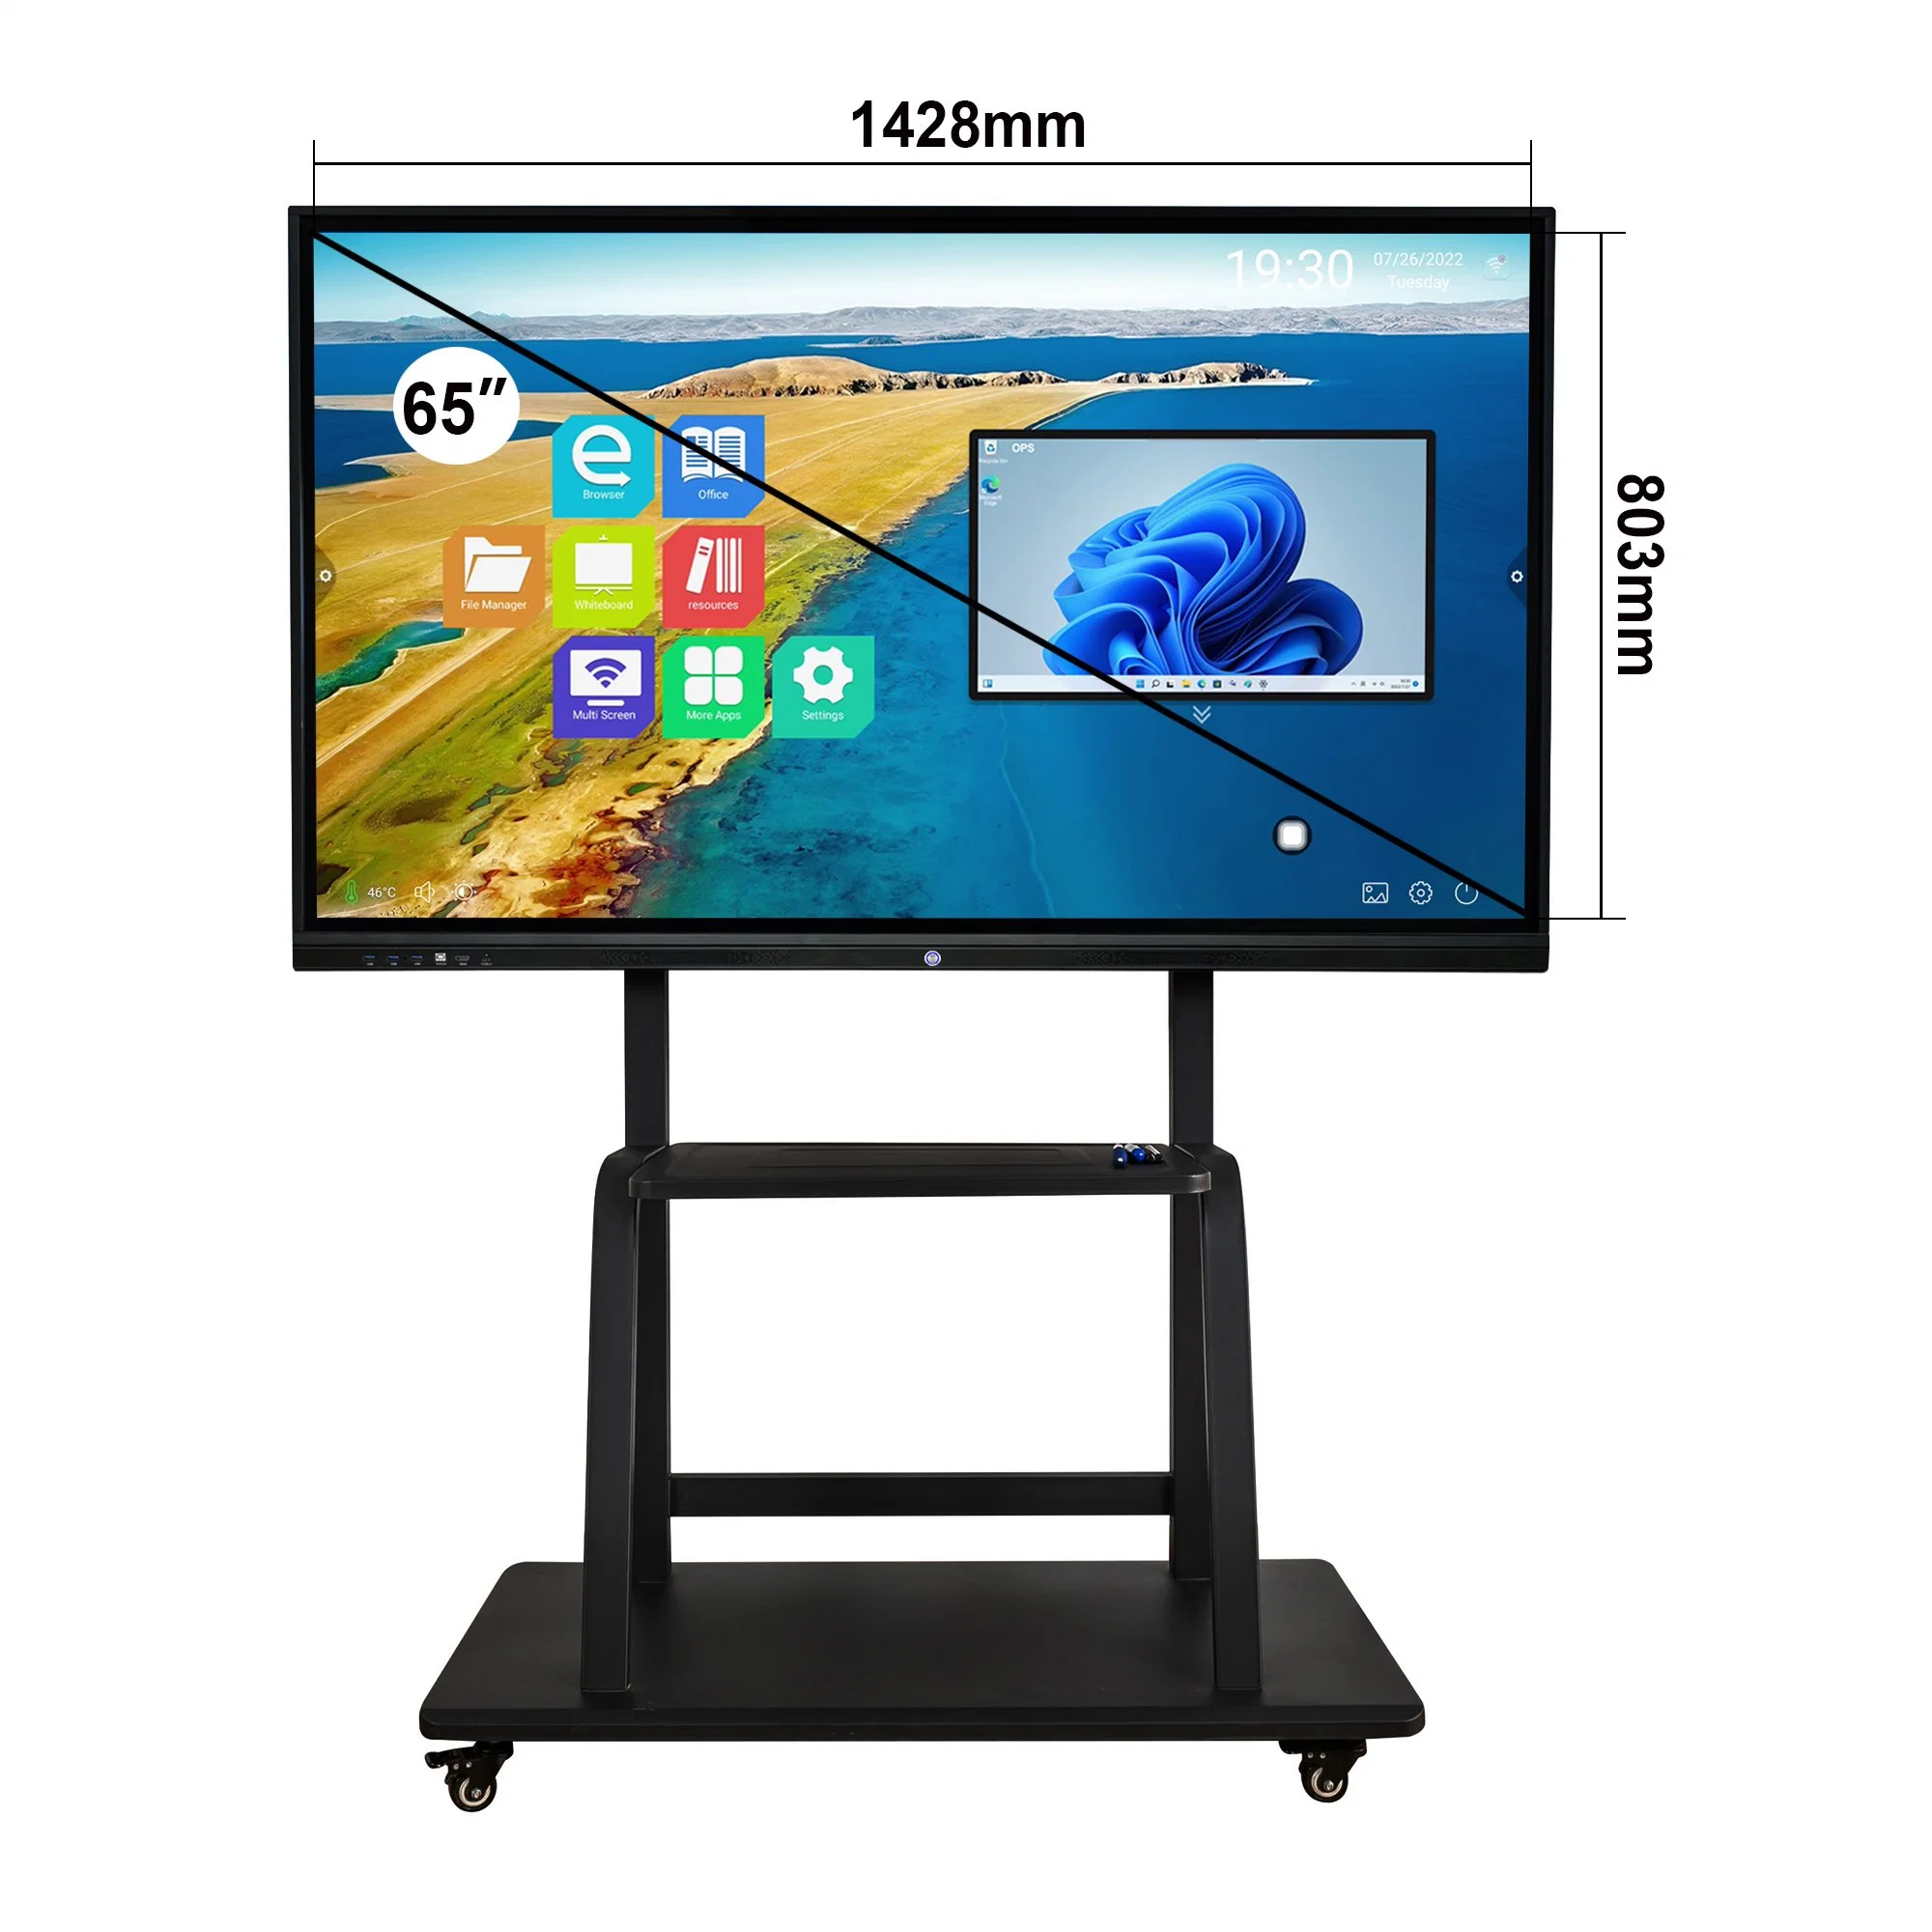 Miboard 65 Inch High Performance Horion Interactive Flat Panel I3 I5 I7 Intel Core Whiteboard Writing Touch Screen Board